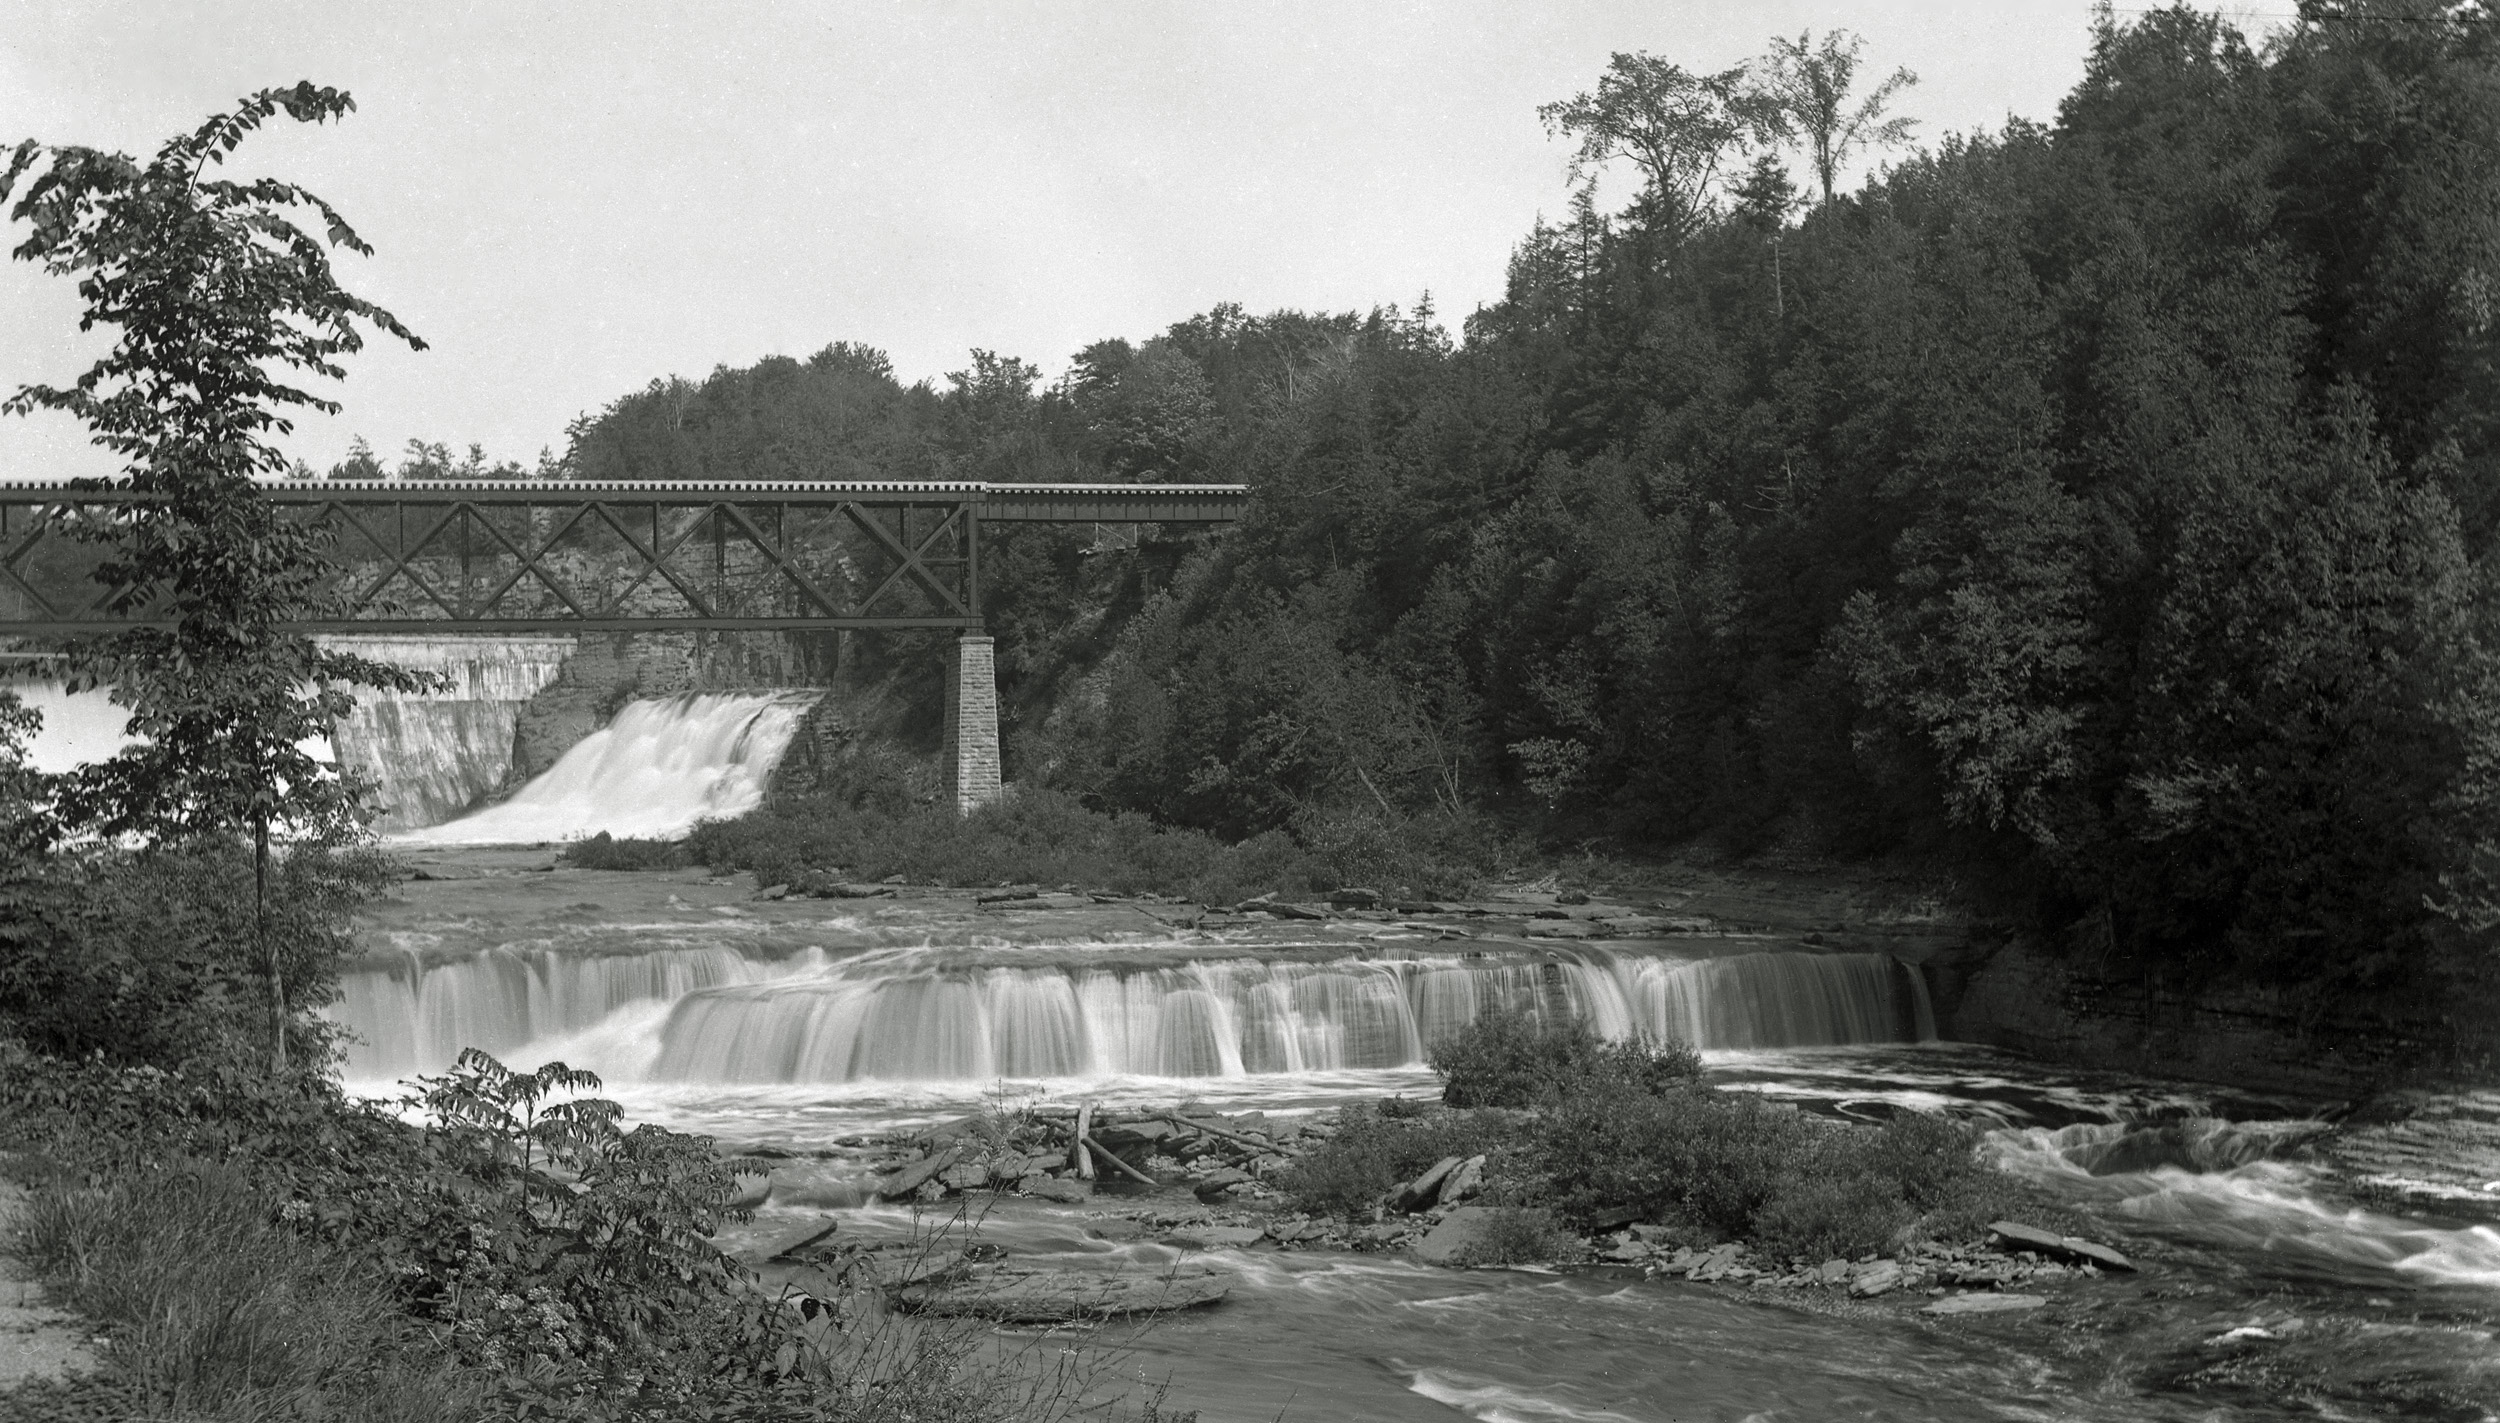 From the collection of film and 4x5 glass negatives I recently purchased. In this photo, the dam, built circa 1906, can be seen.  There is a lot more water in the gorge in this photo than one sees today.  For the past 10 years or so, the power company had opened the falls on two weekends every year, but all that did was let us see what was lost to the need to generate power.  That practice ended a couple of years ago, in any event. View full size.





